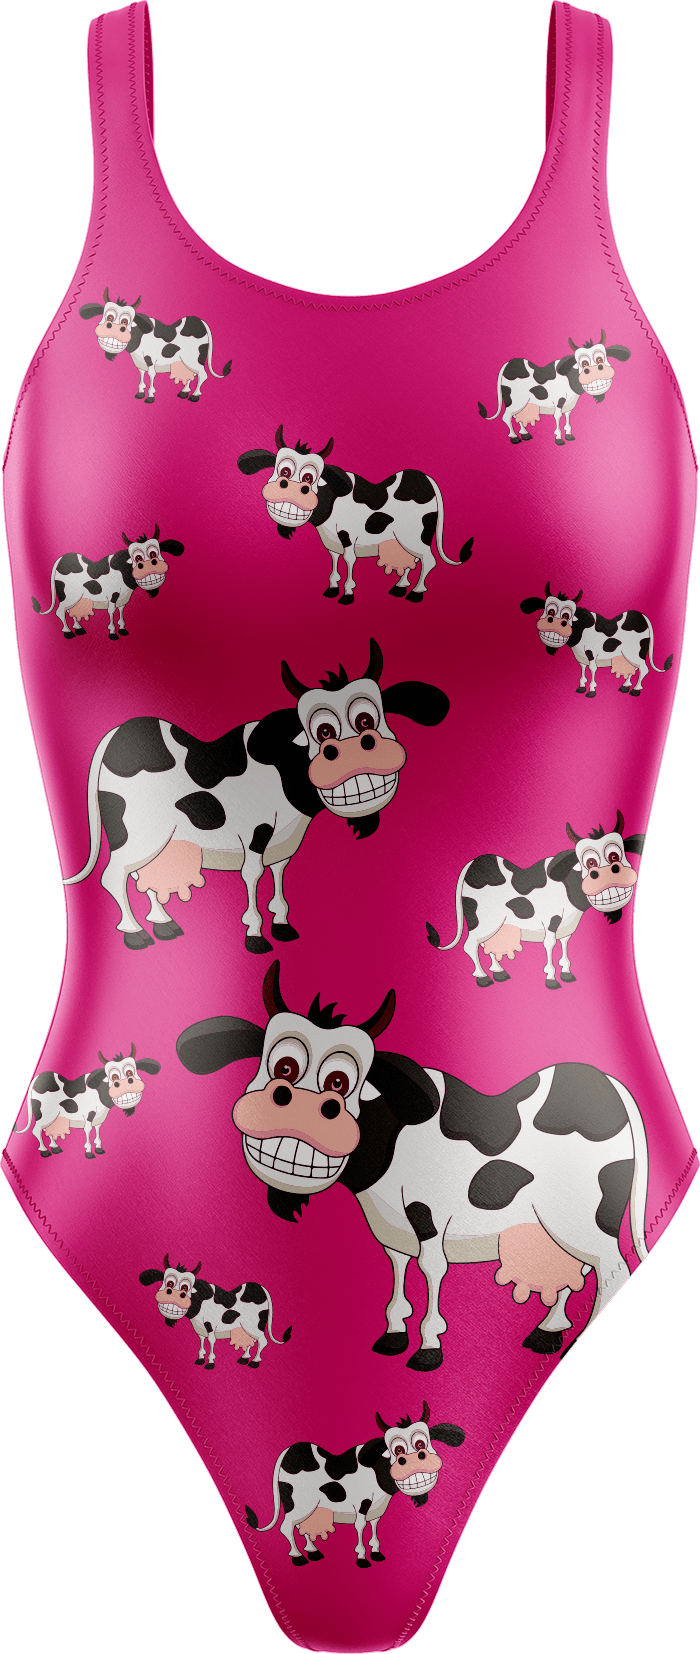 Fussy Cow Swimsuits - fungear.com.au